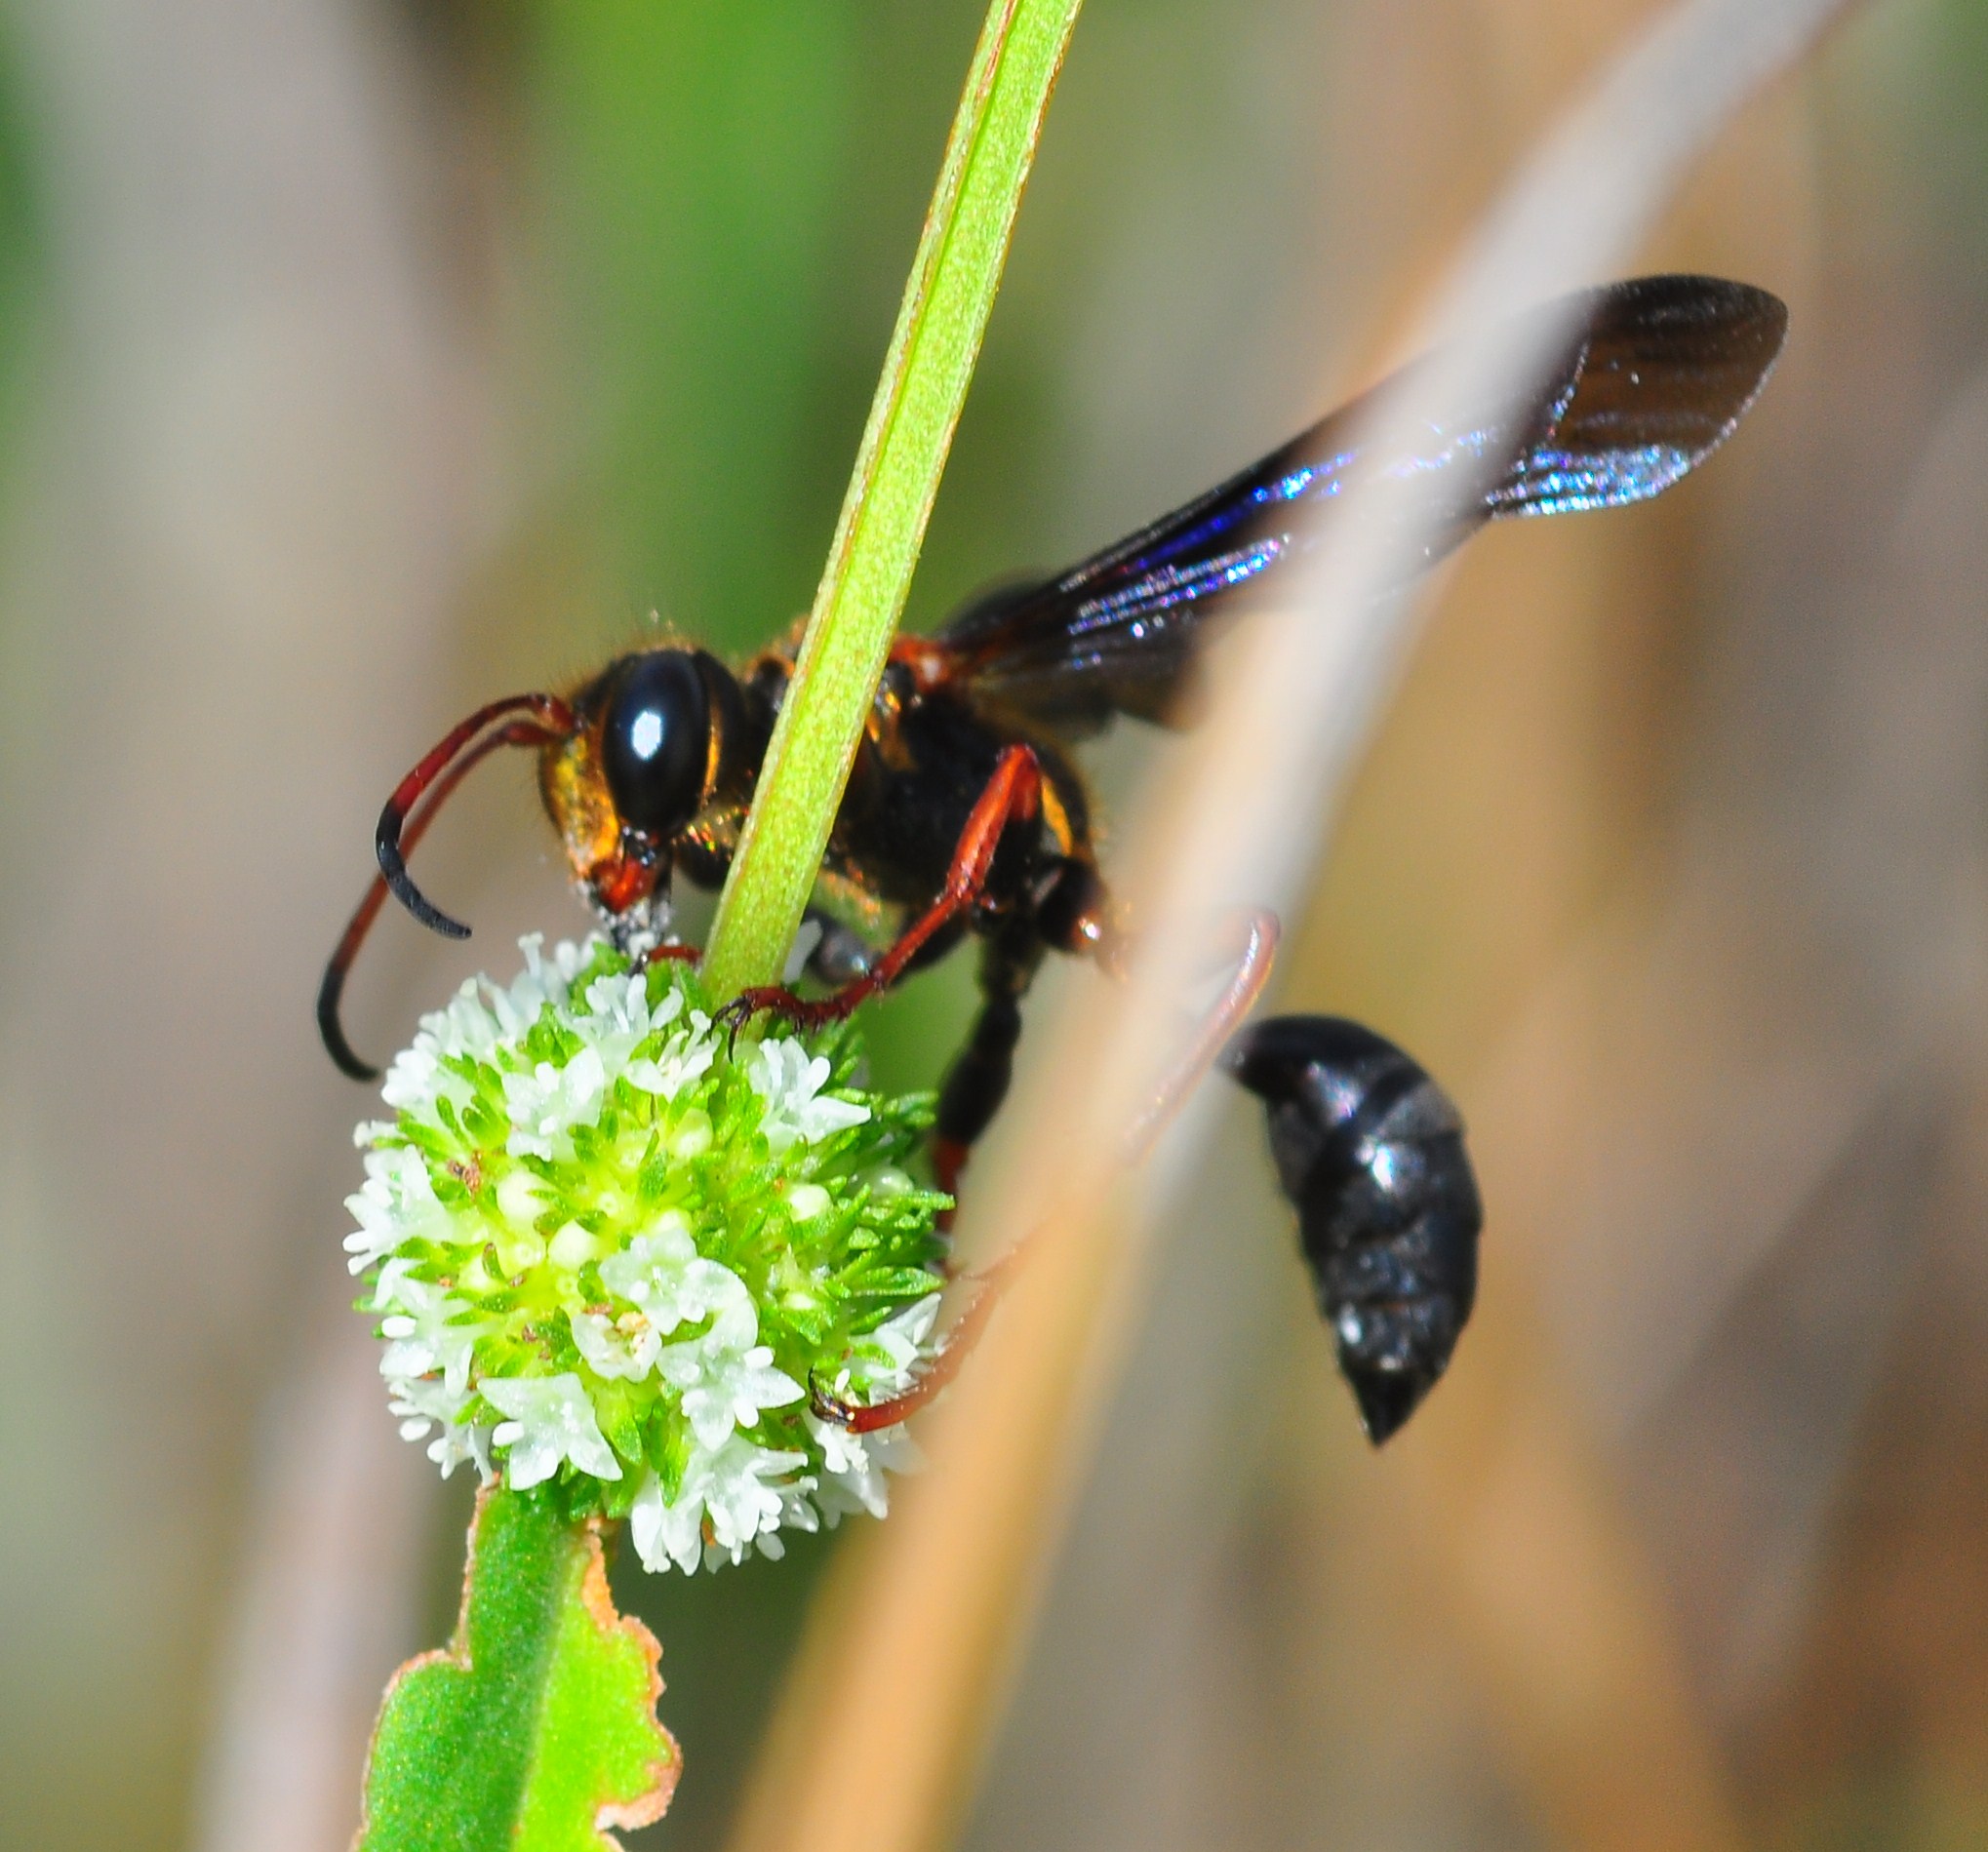 "Black wasp on flower in Enchanted Forest Park"